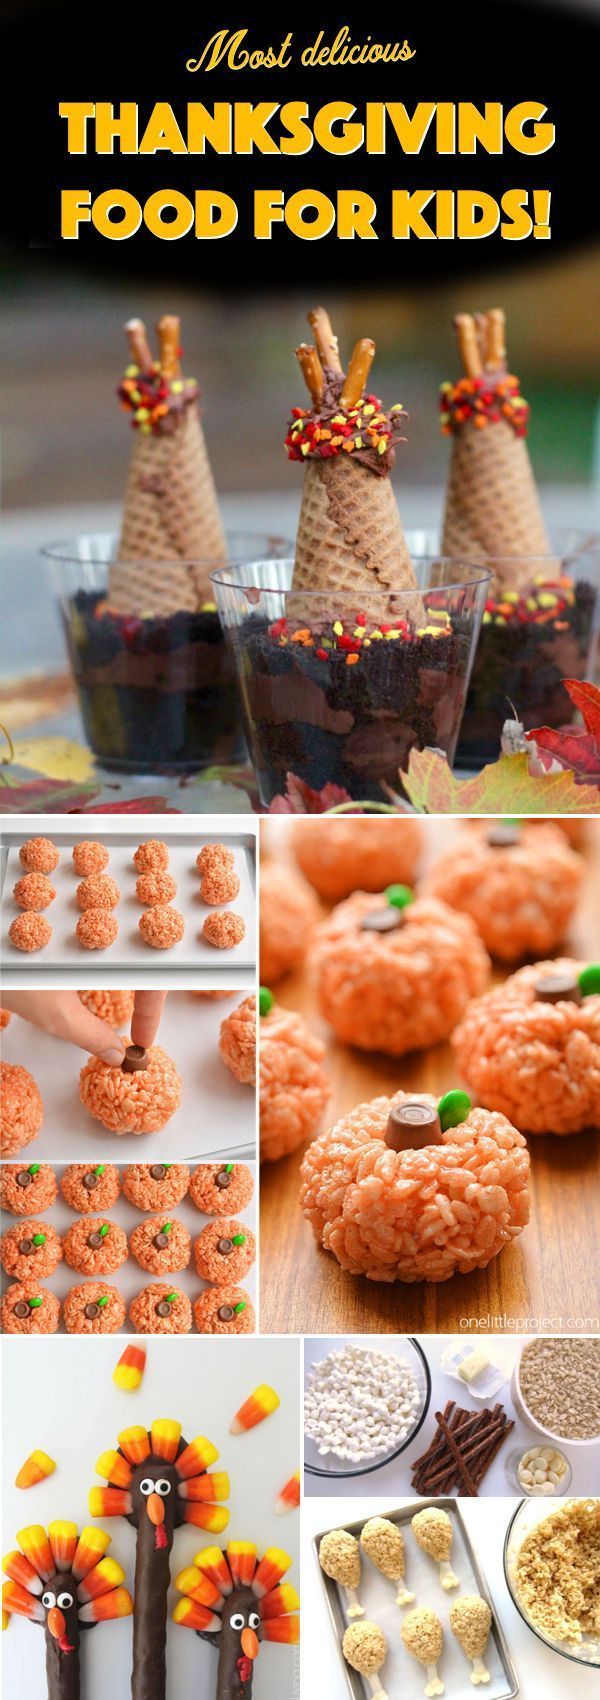 The Most Delicious Thanksgiving Food for Kids! -   19 thanksgiving crafts sweet treats
 ideas